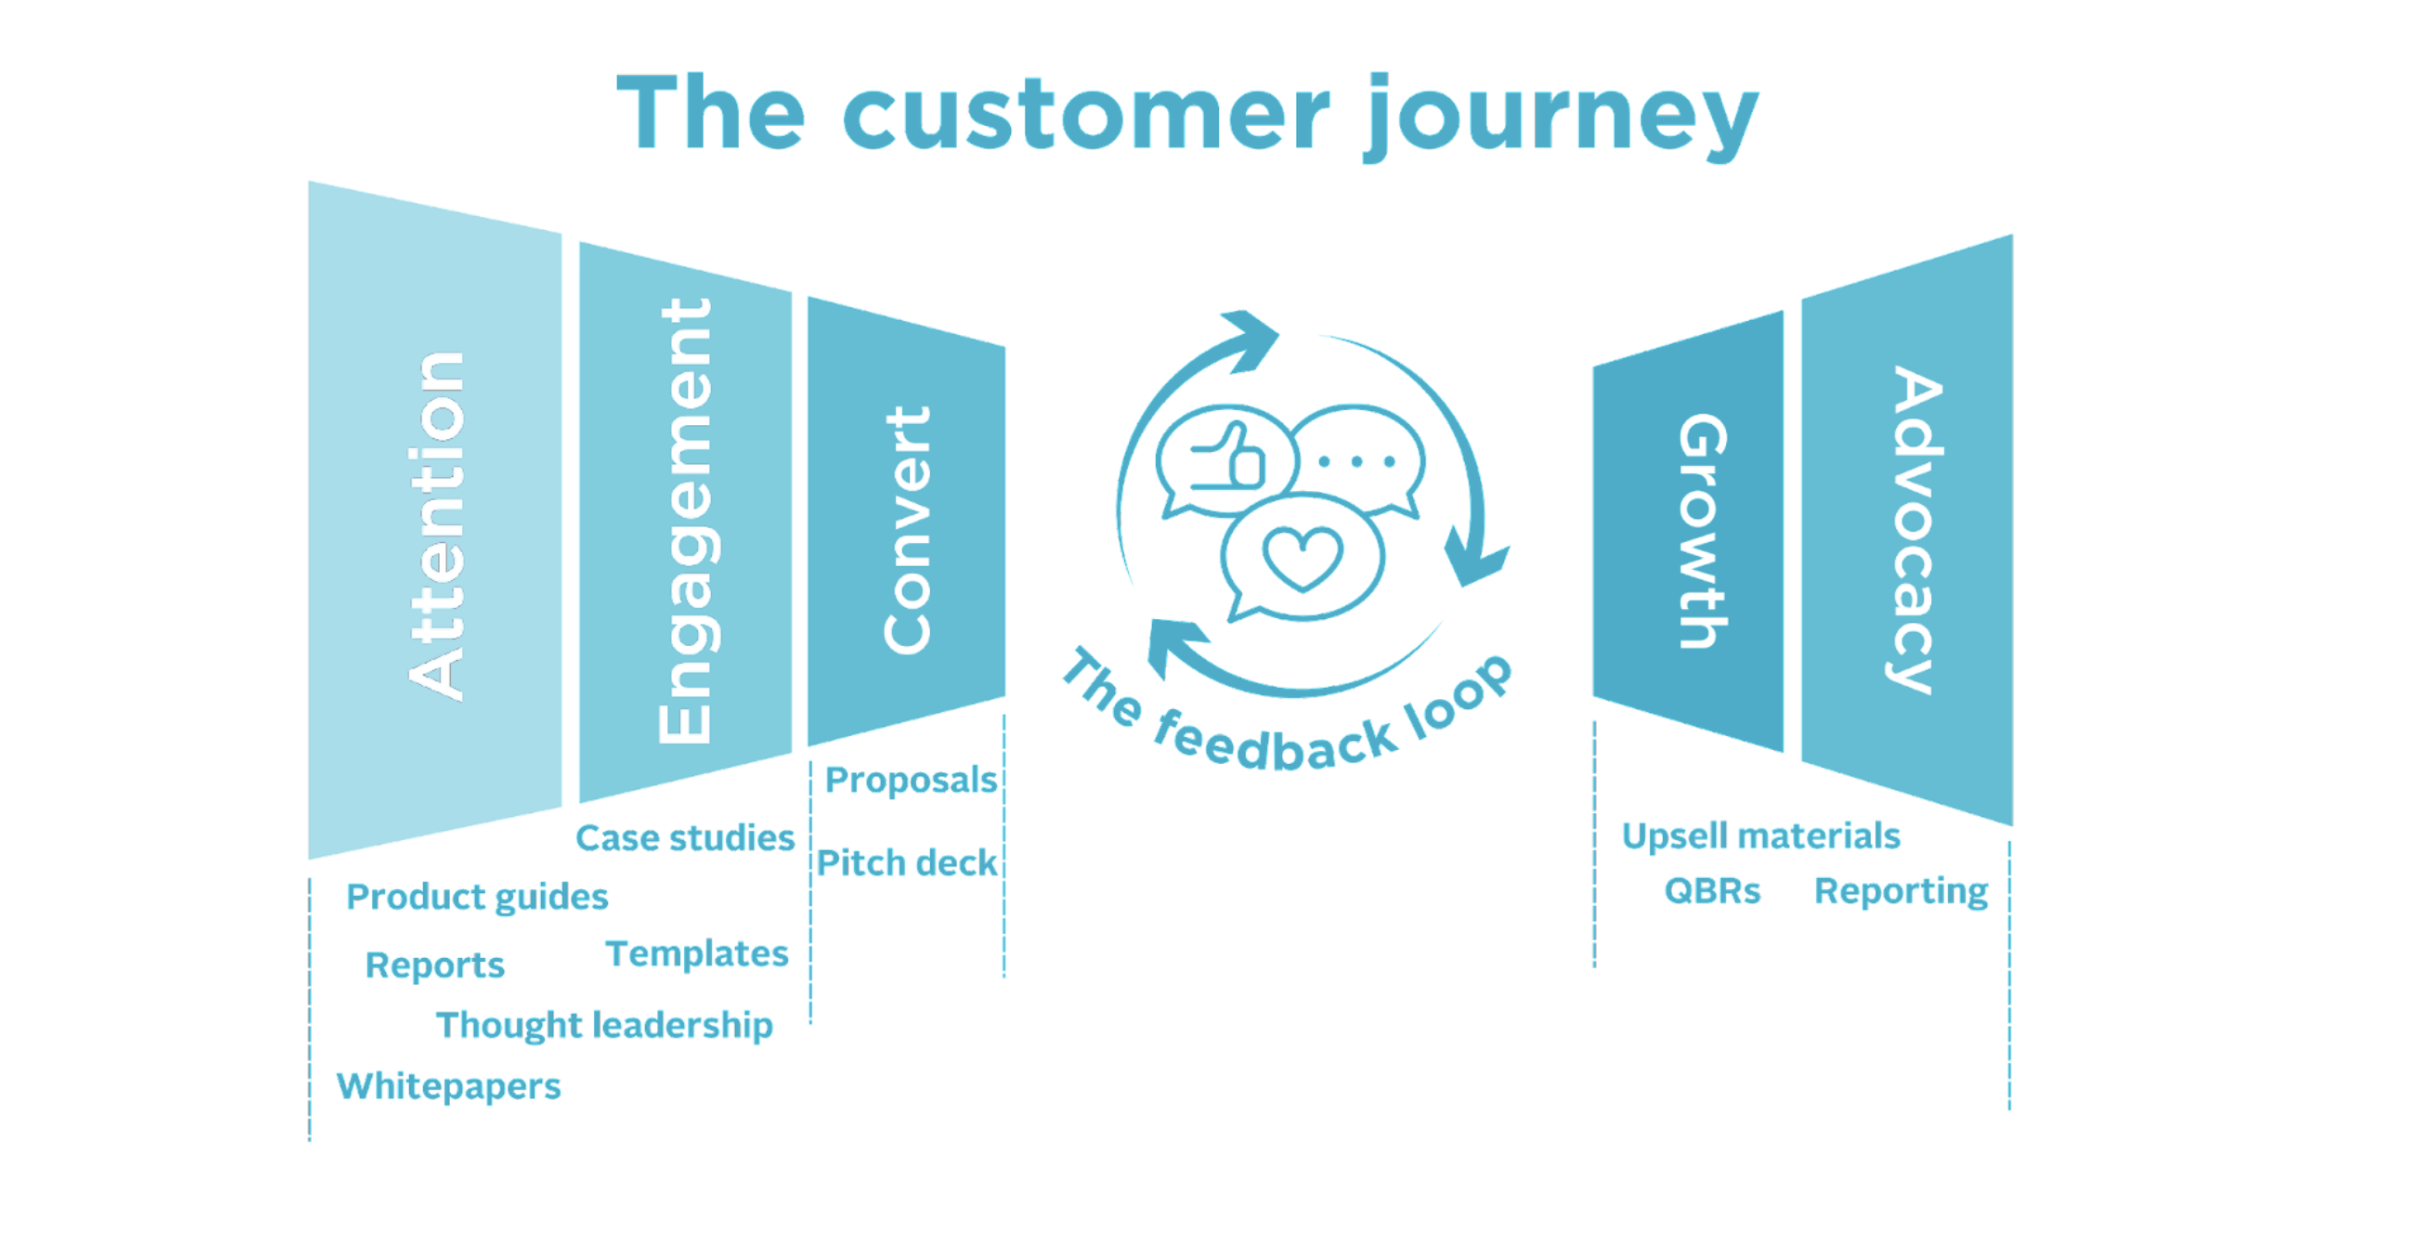 graphic of the customer journey; attention, engagement, convert, growth, and advocacy